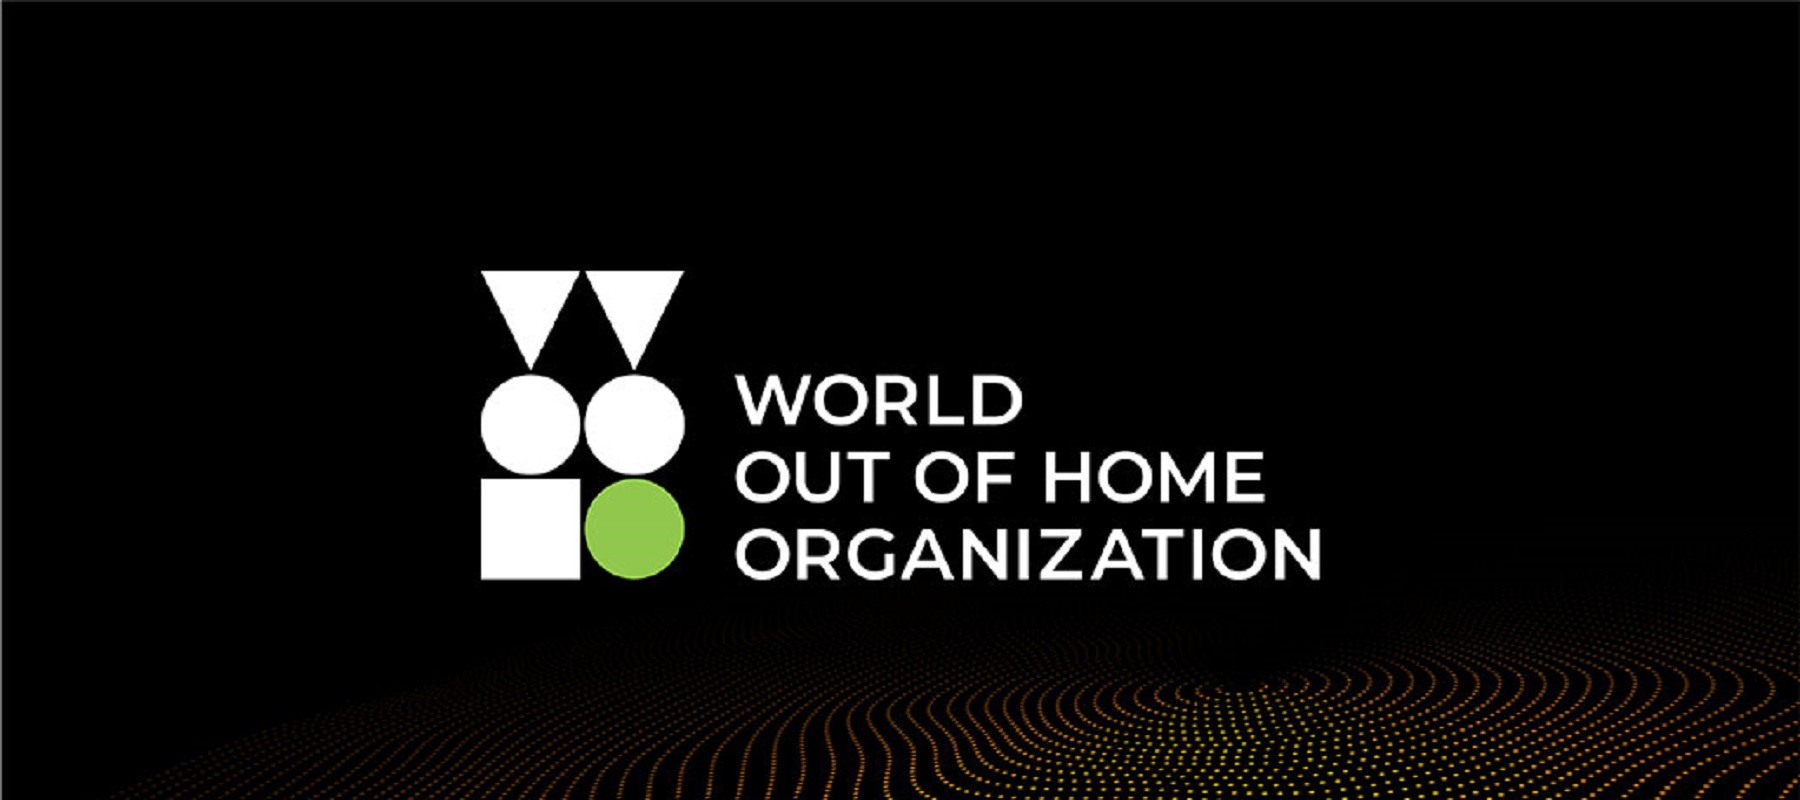 World Out of Home Organization adds eleven new members from four continents